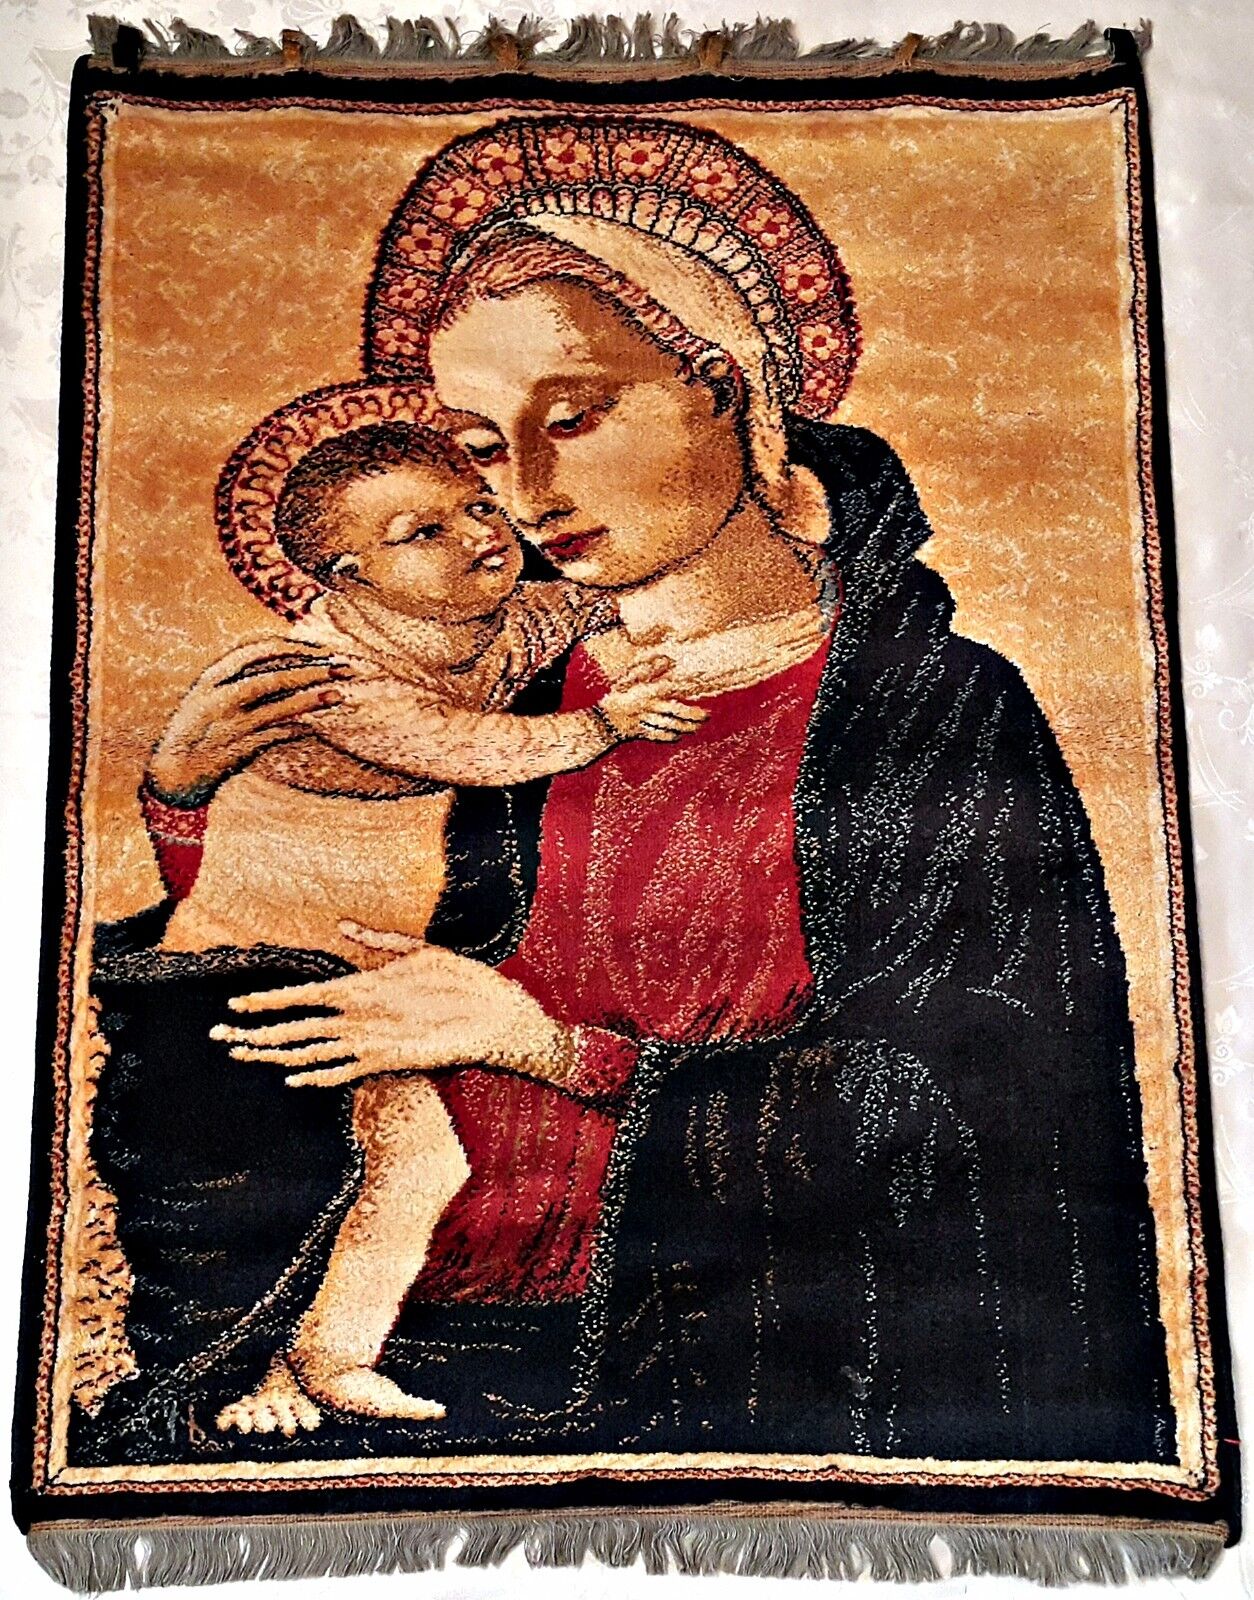 VINTAGE LAHORE RELIGIOUS ART HOLY MARY&BABY JESUS WALL TAPESTRY CARPET:95x130cm